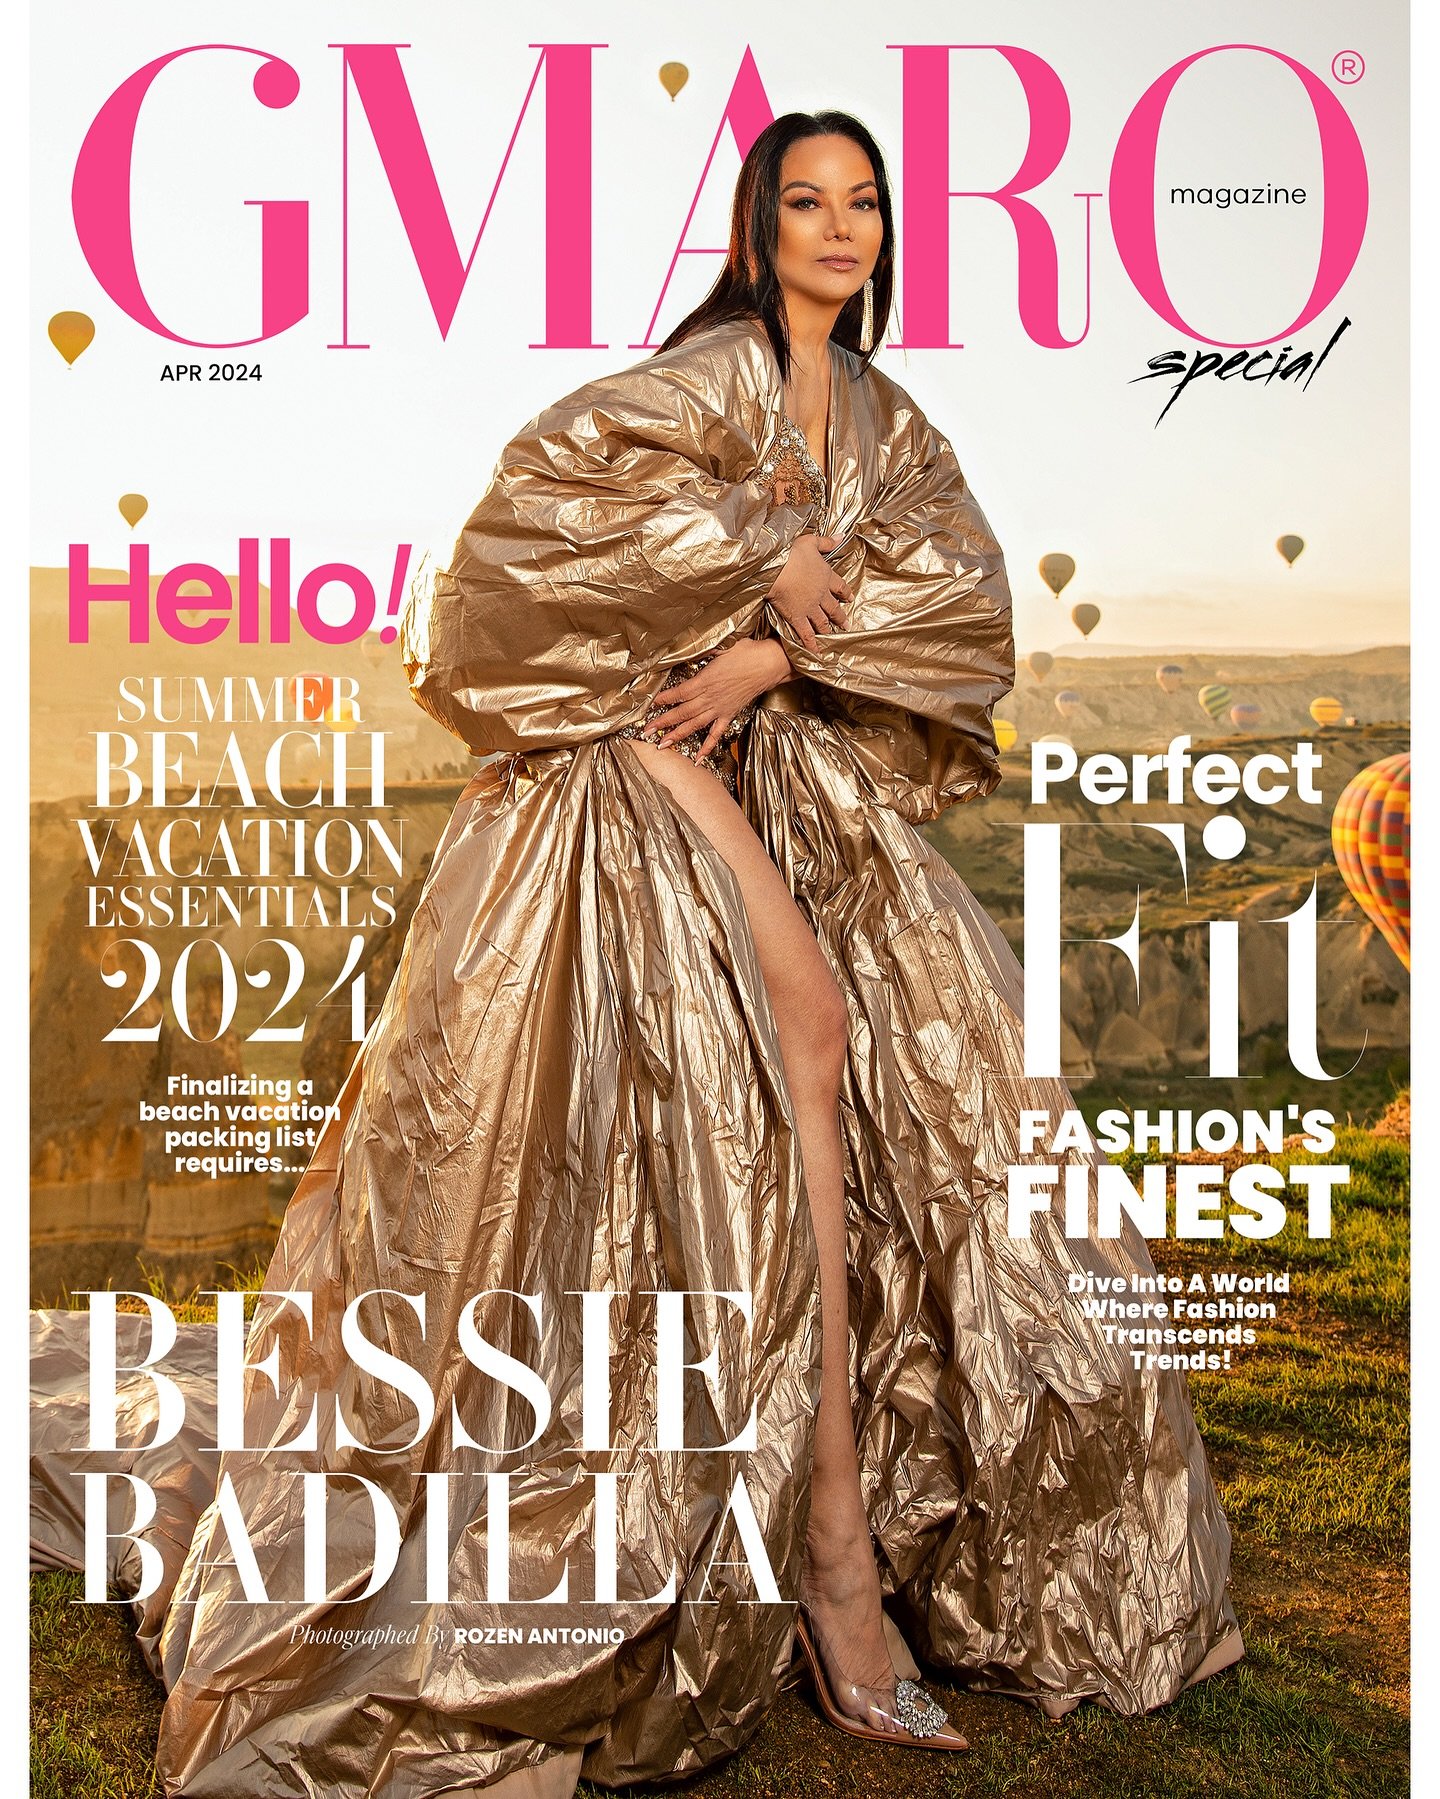 Discover the behind-the-scenes magic in the latest GMARO Magazine&lsquo;s April 2024 Issue! Photographer Rozen Antonio teams up with cover model Bessie Badilla to overcome the unique challenges of international location shoots. From long drives and h